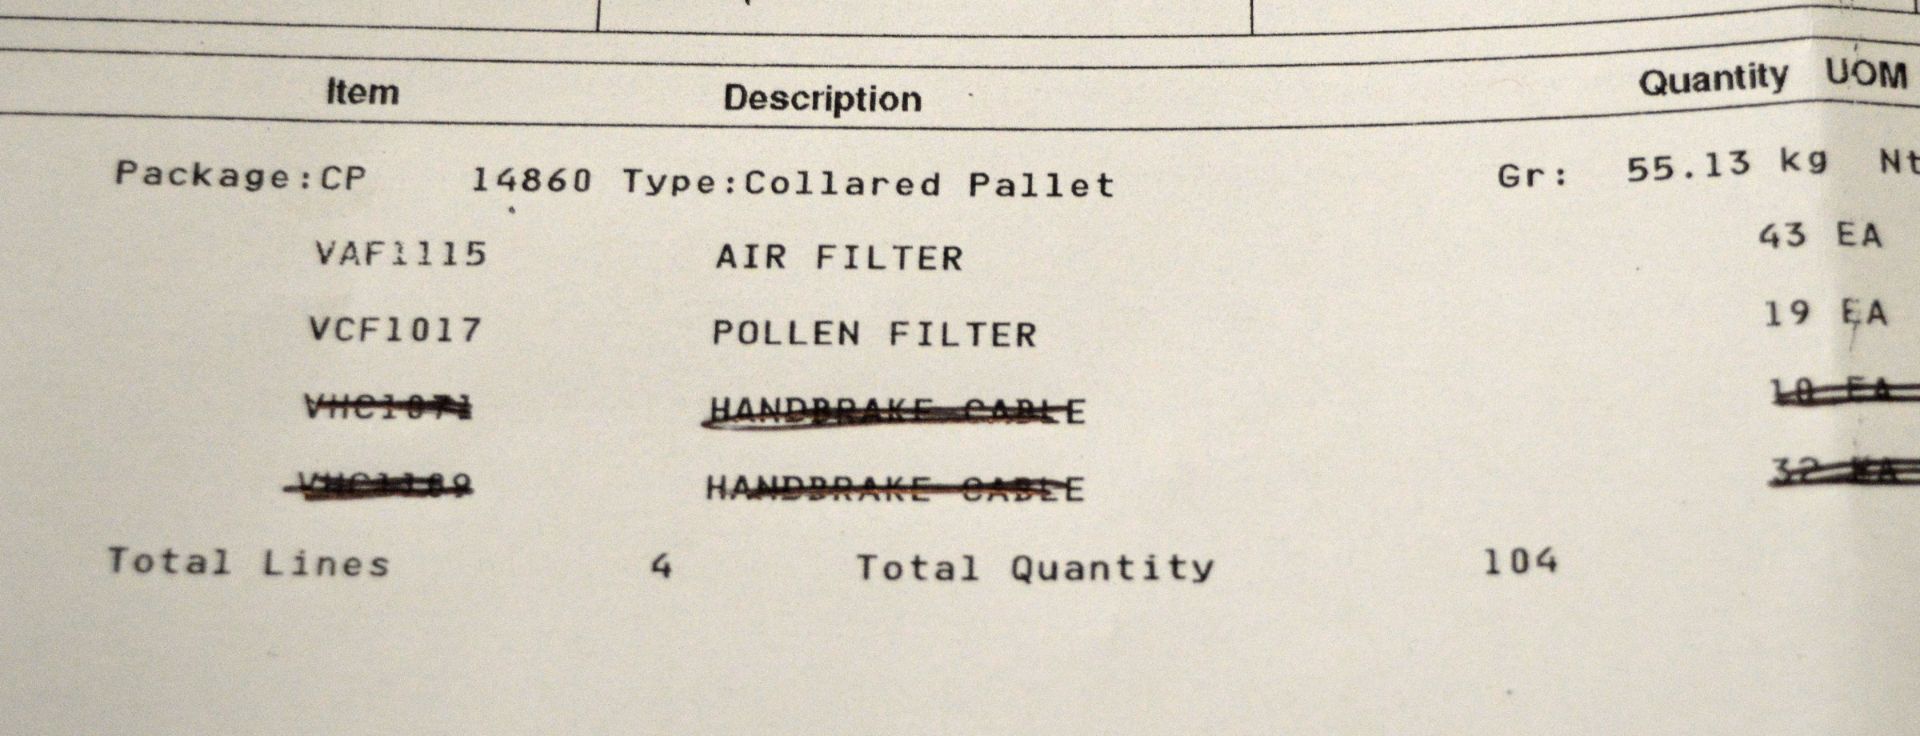 Vehicle parts - Air filters - see picture for itinerary for model numbers and quantities - Image 6 of 6